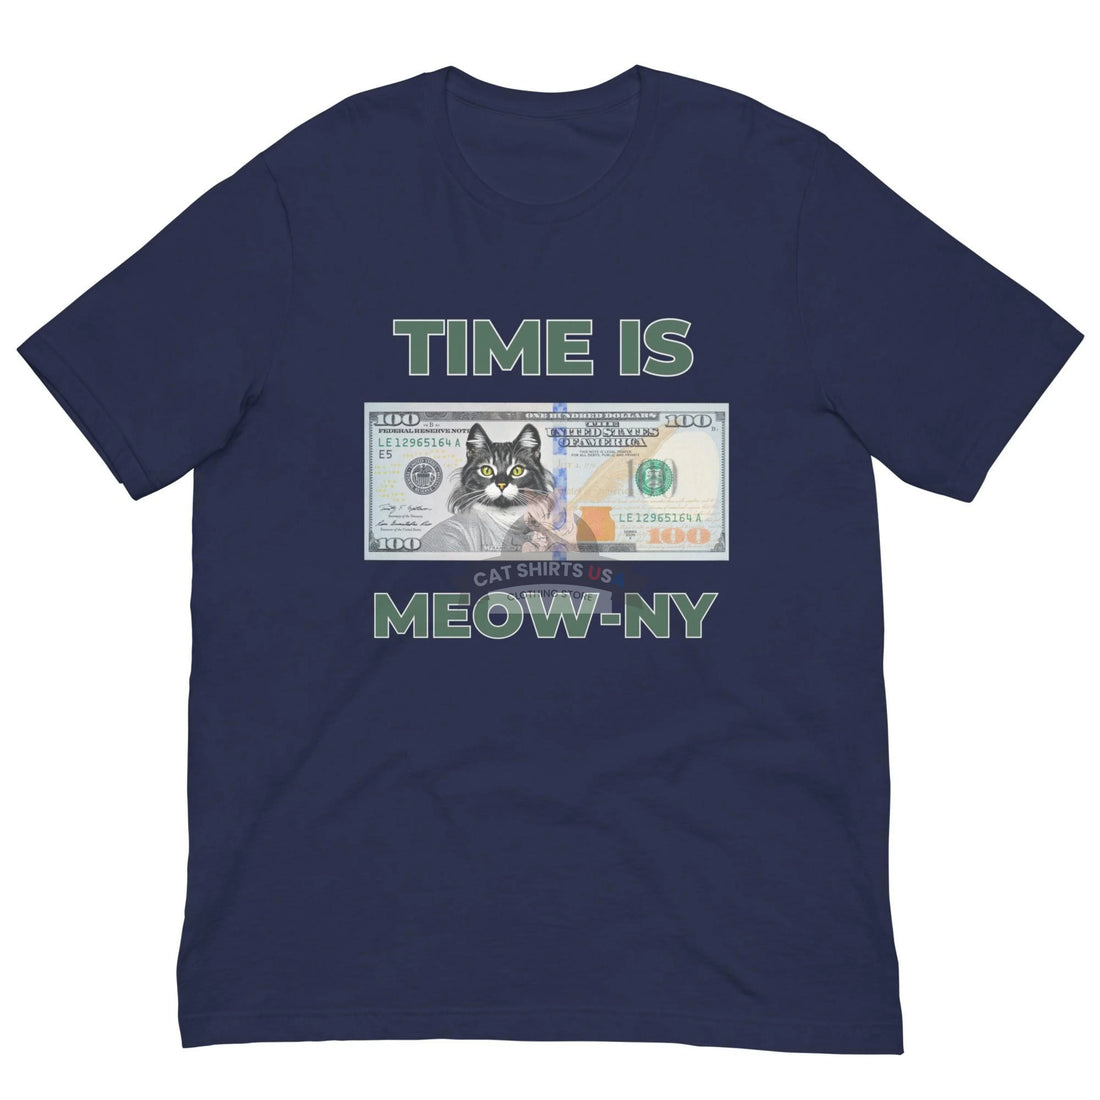 Time is Meow-ny Cat Shirt - Cat Shirts USA